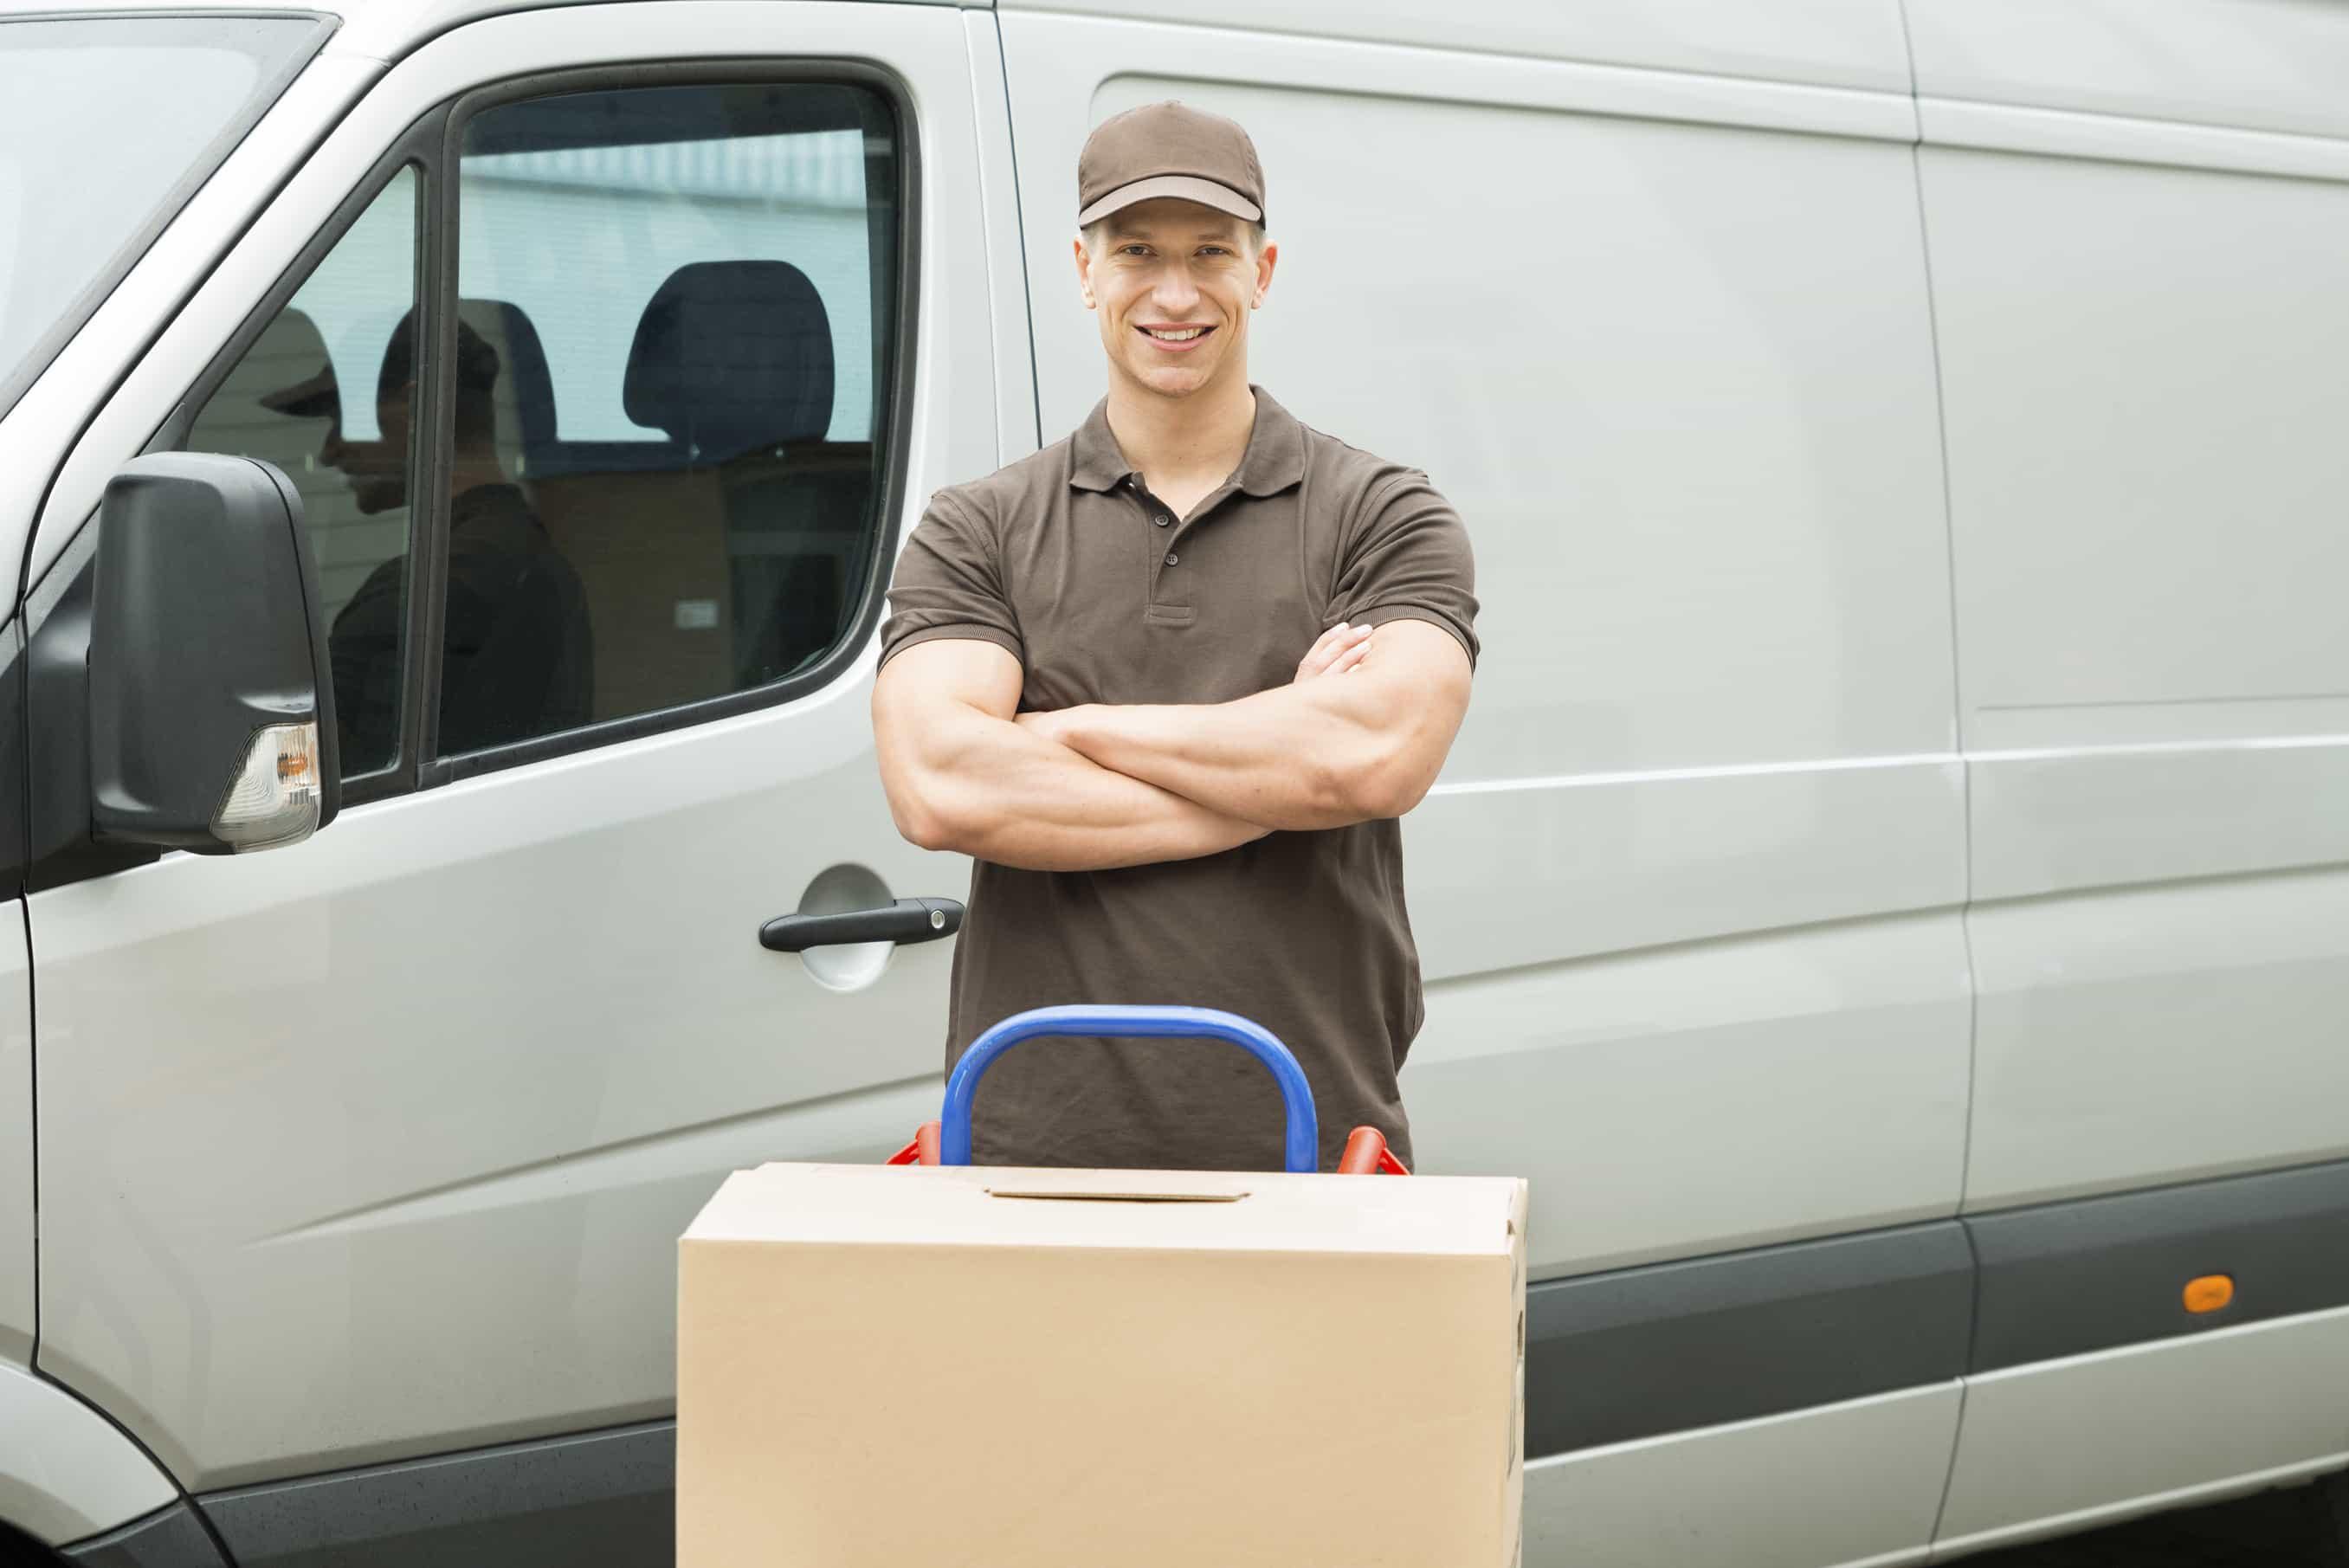 Excellent tips to receive accurate moving estimates